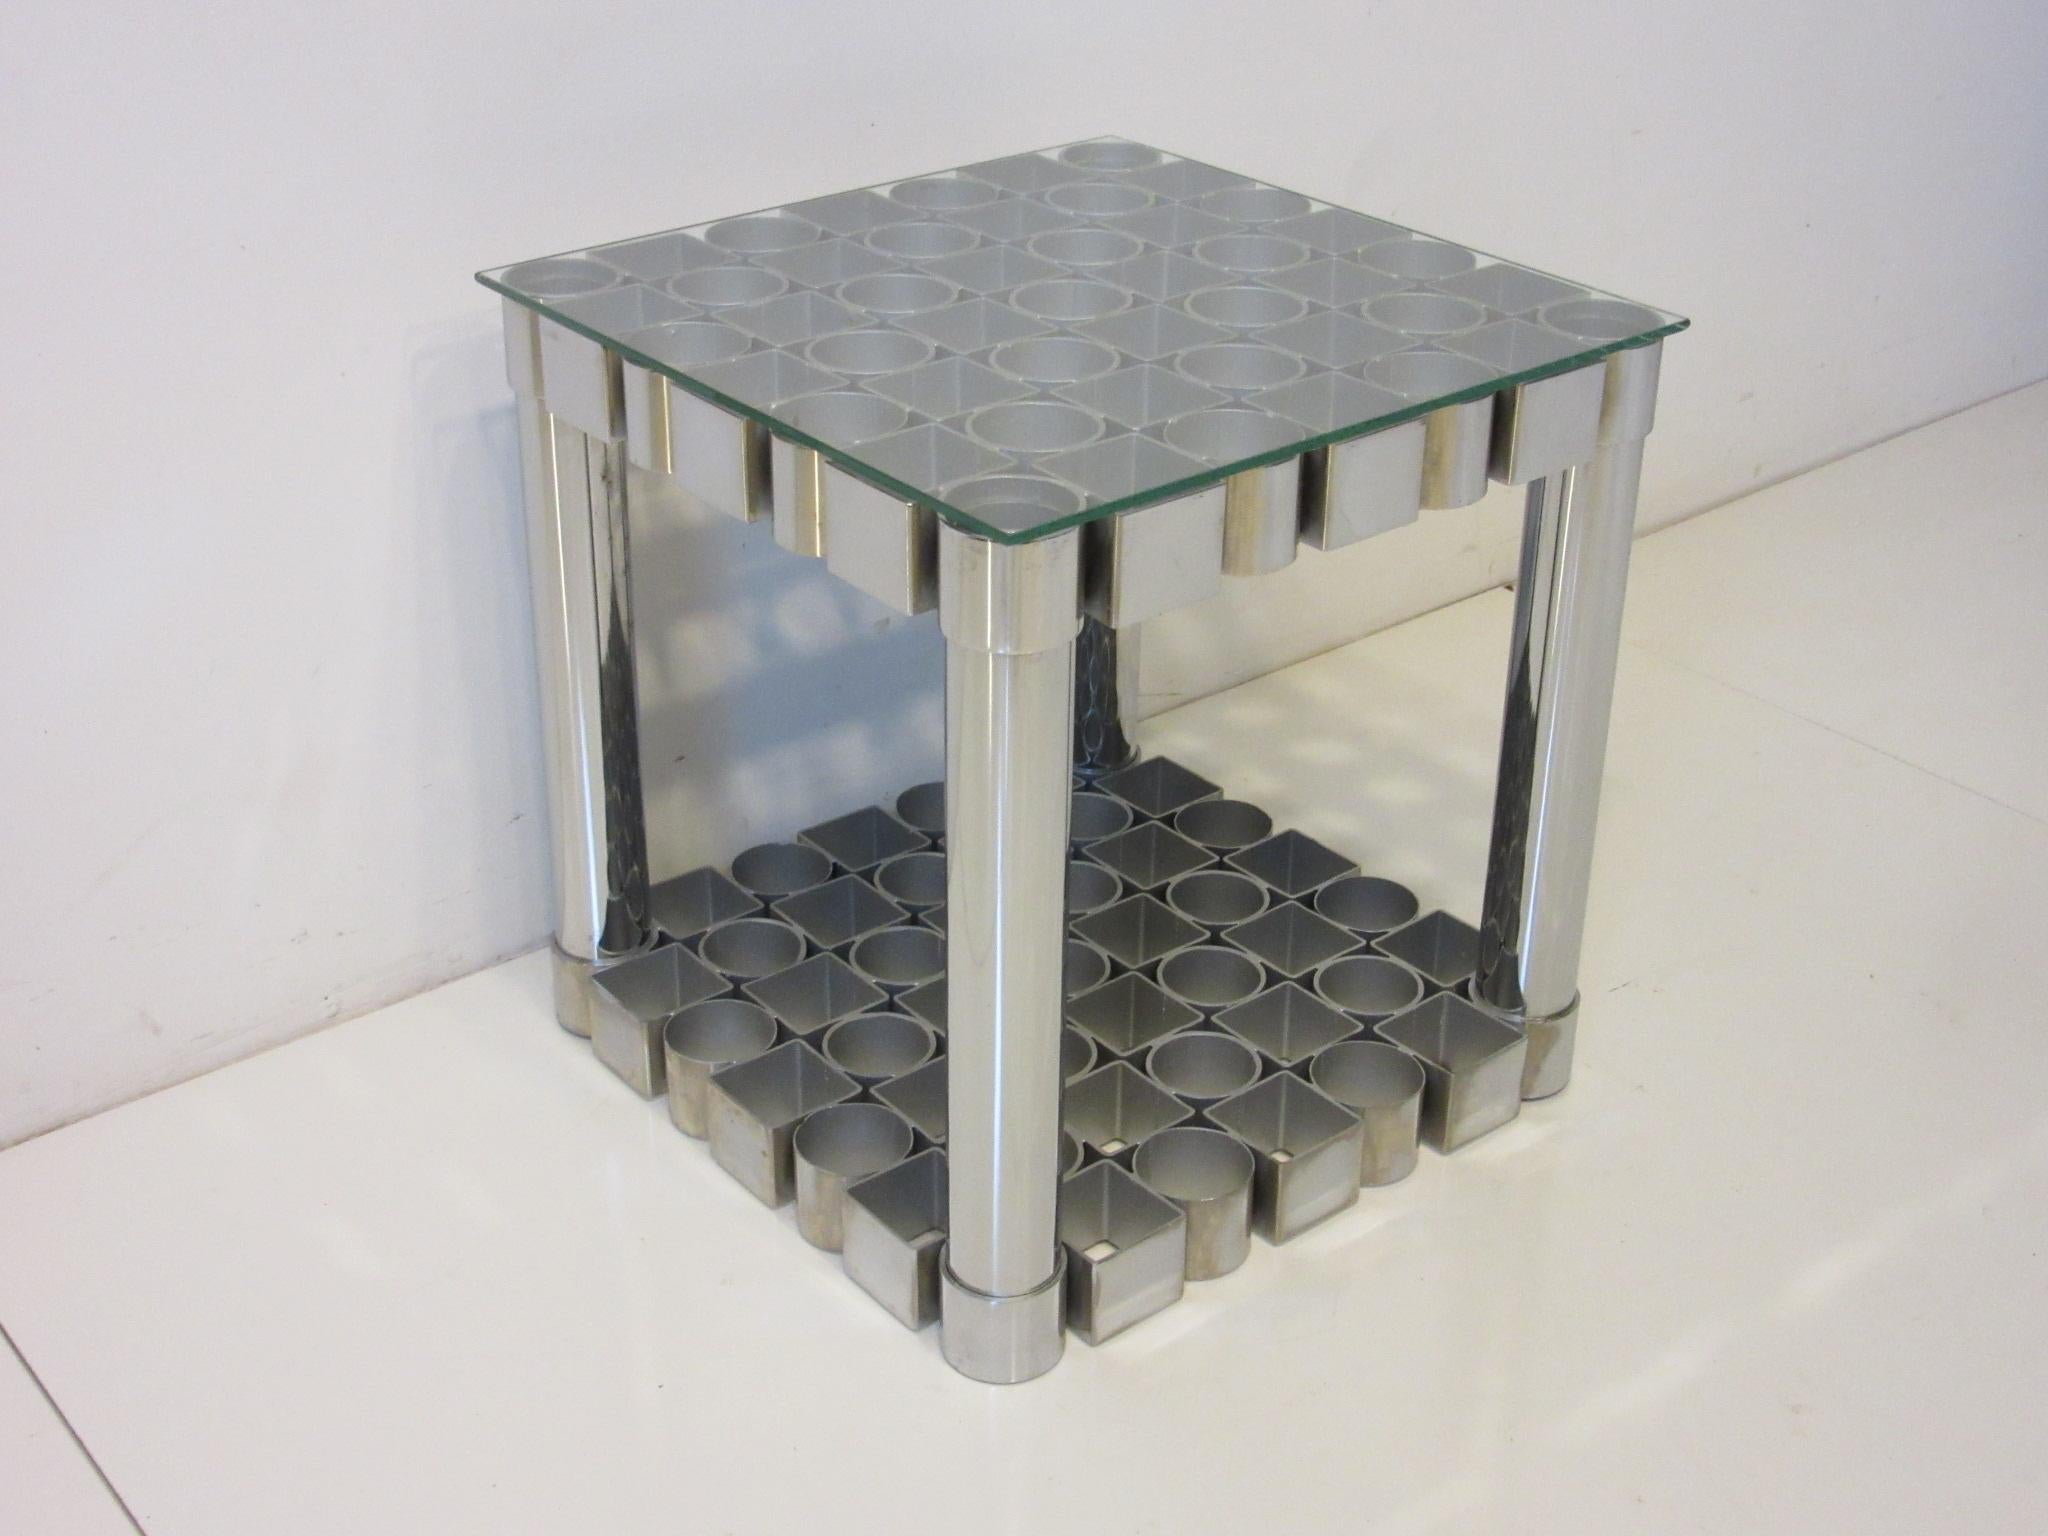 A handcrafted 1970's sculptural chromed steel side table with square and circle designs , this Op Art styled piece has all hand welded construction . This heavy well made occasional side table has a glass top and still retains the manufactures label